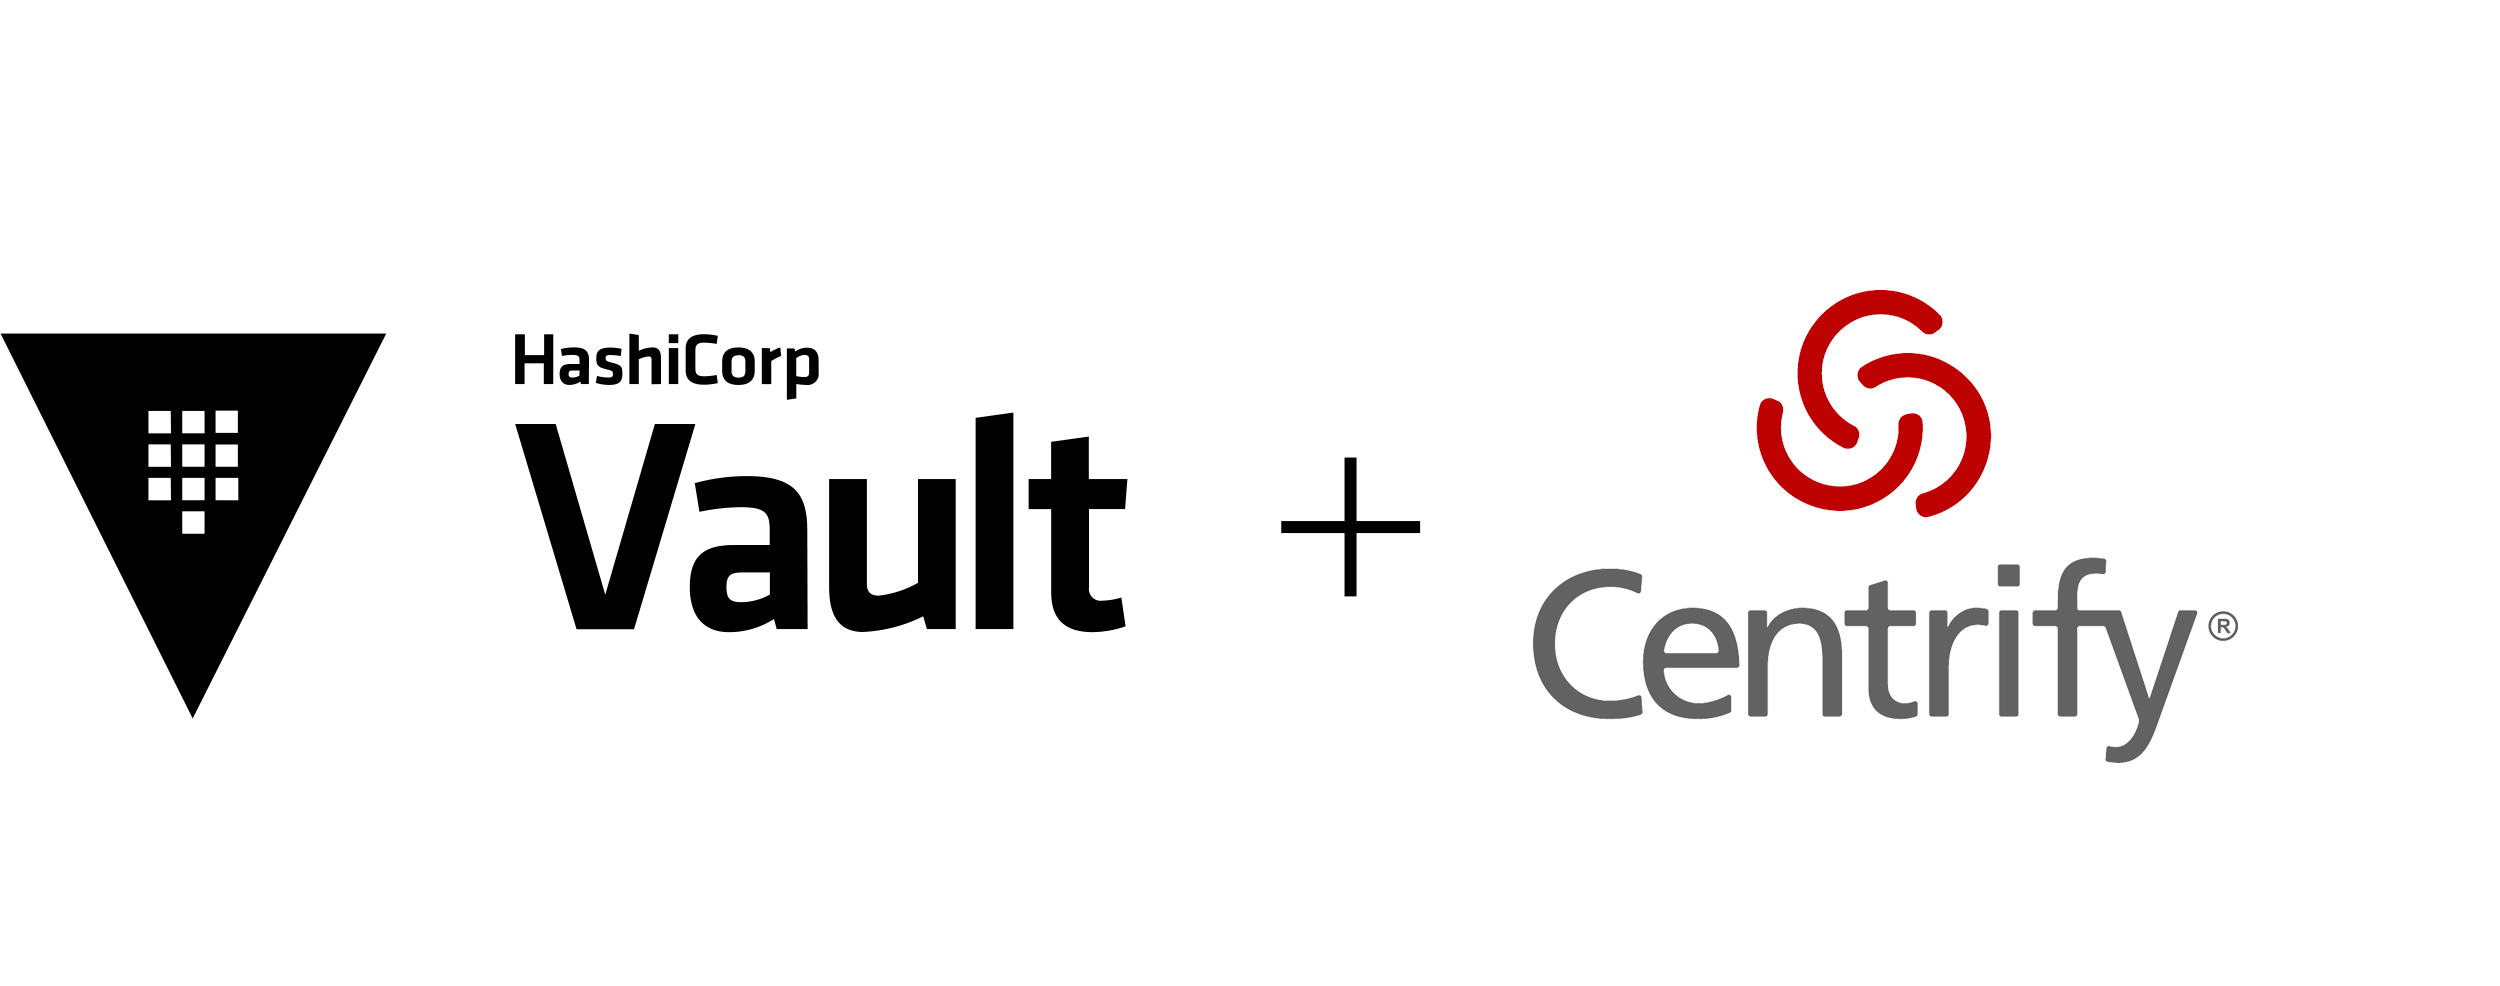 Introducing Centrify Identity Services for HashiCorp Vault